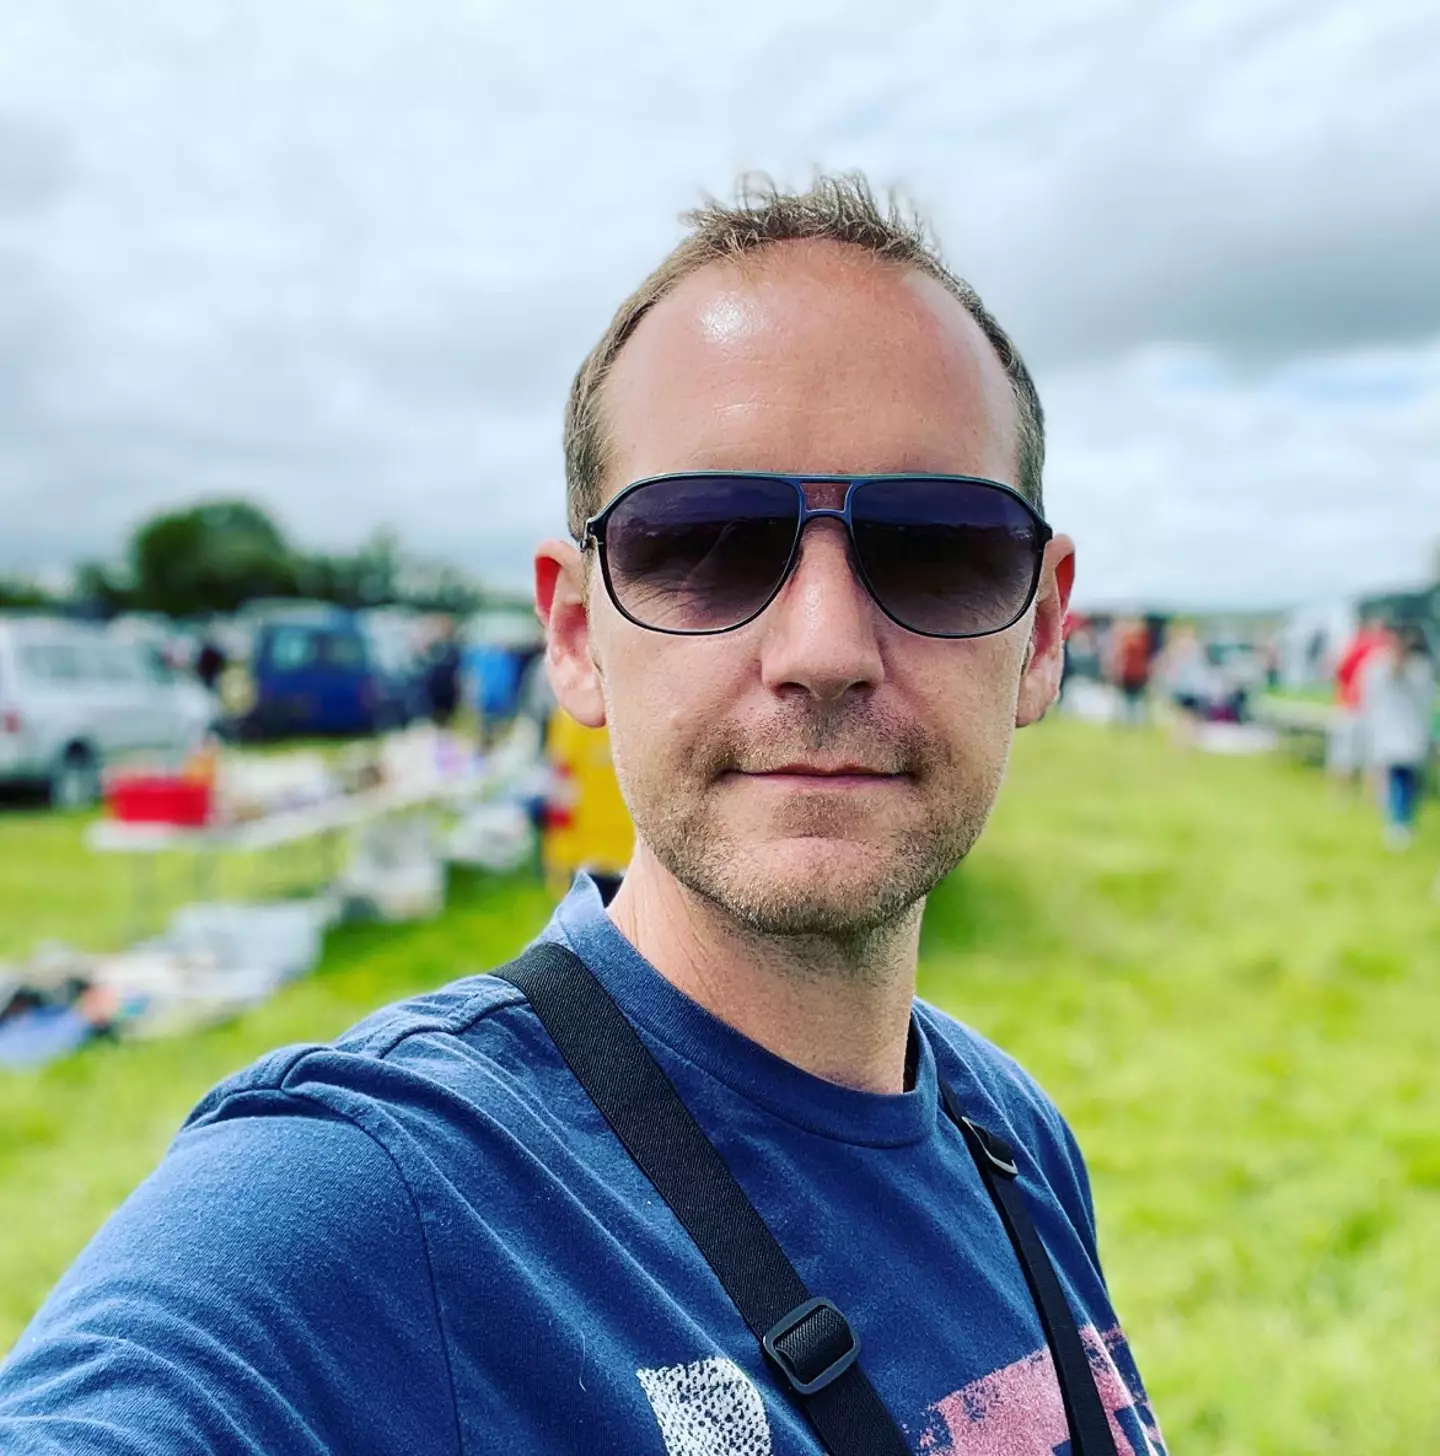 Known as Car Boot Chris, the 44-year-old says he left his police job four years ago after his successful side-hustle now brings in up to £5,000 a month.